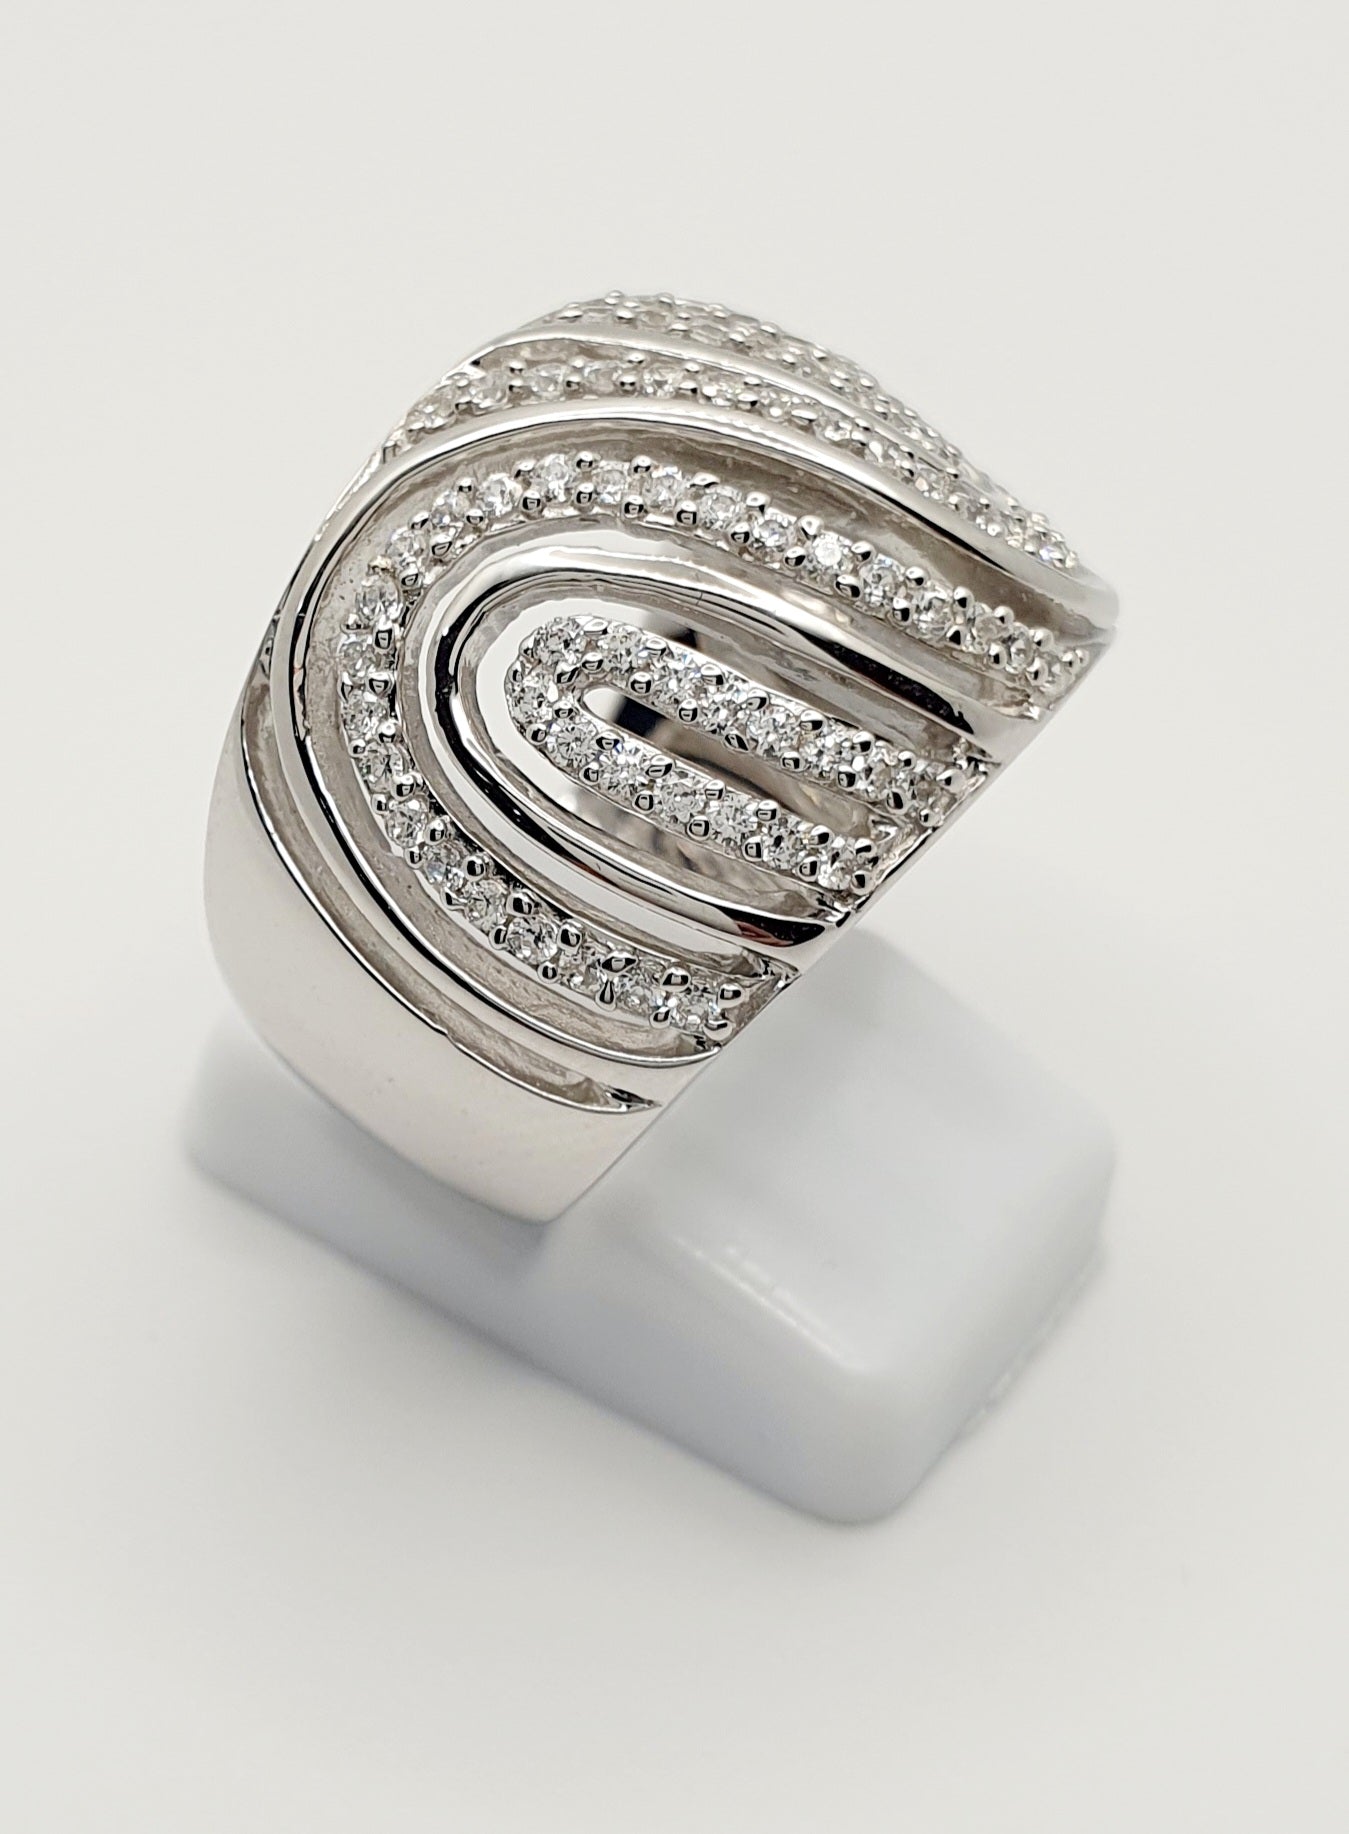 Sterling Silver, Wide Band Multi Swirl Ring w/ White Cubic Zirconias